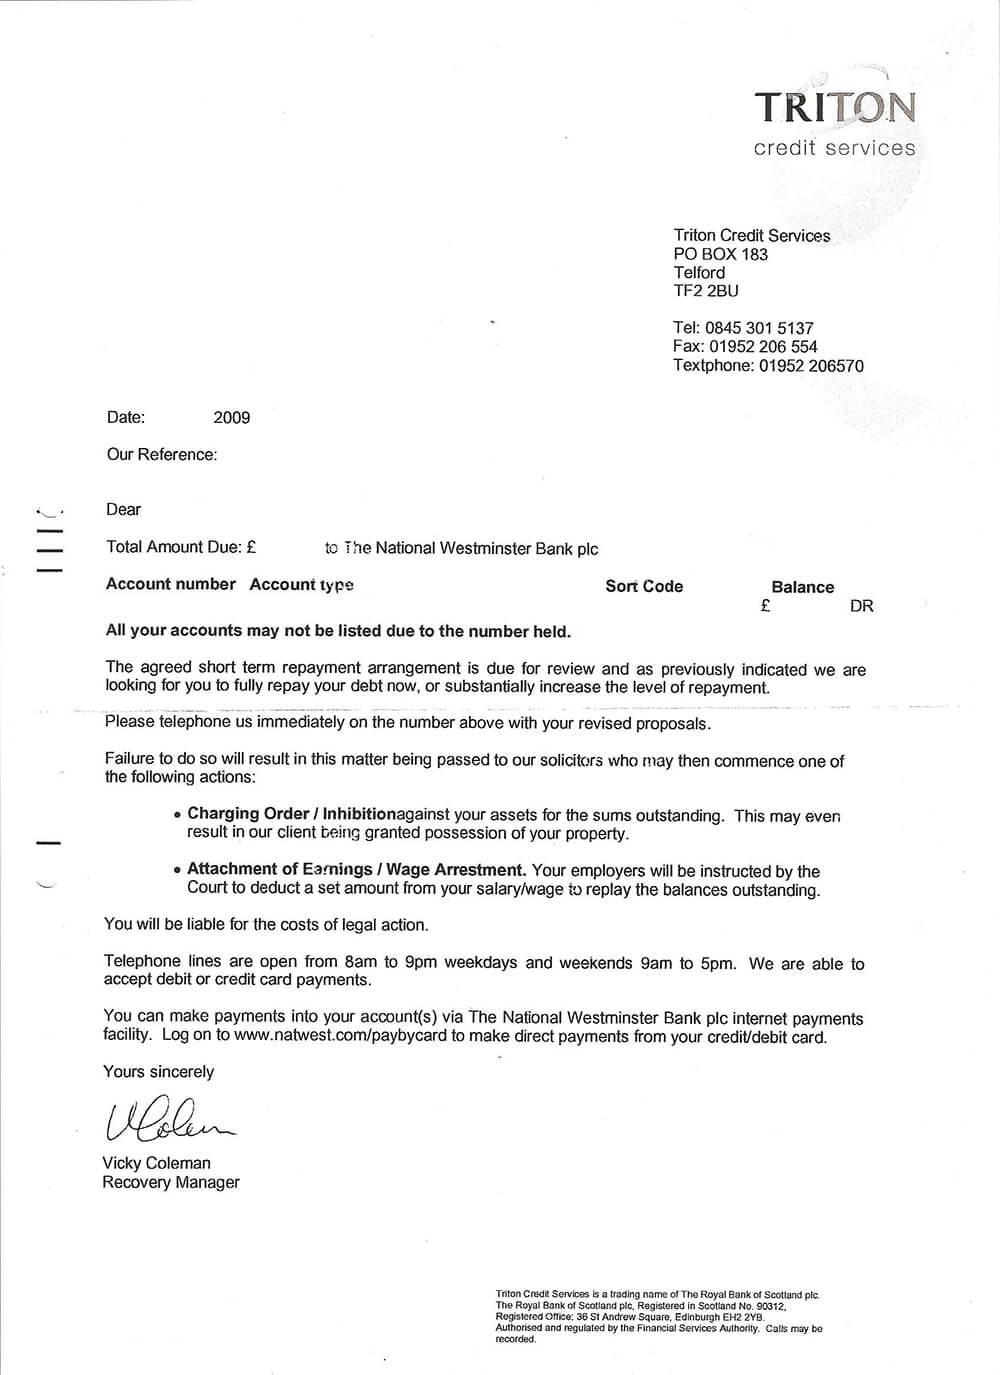 Ppi Cover Letter - Calep.midnightpig.co Regarding Ppi Claim Letter Template For Credit Card